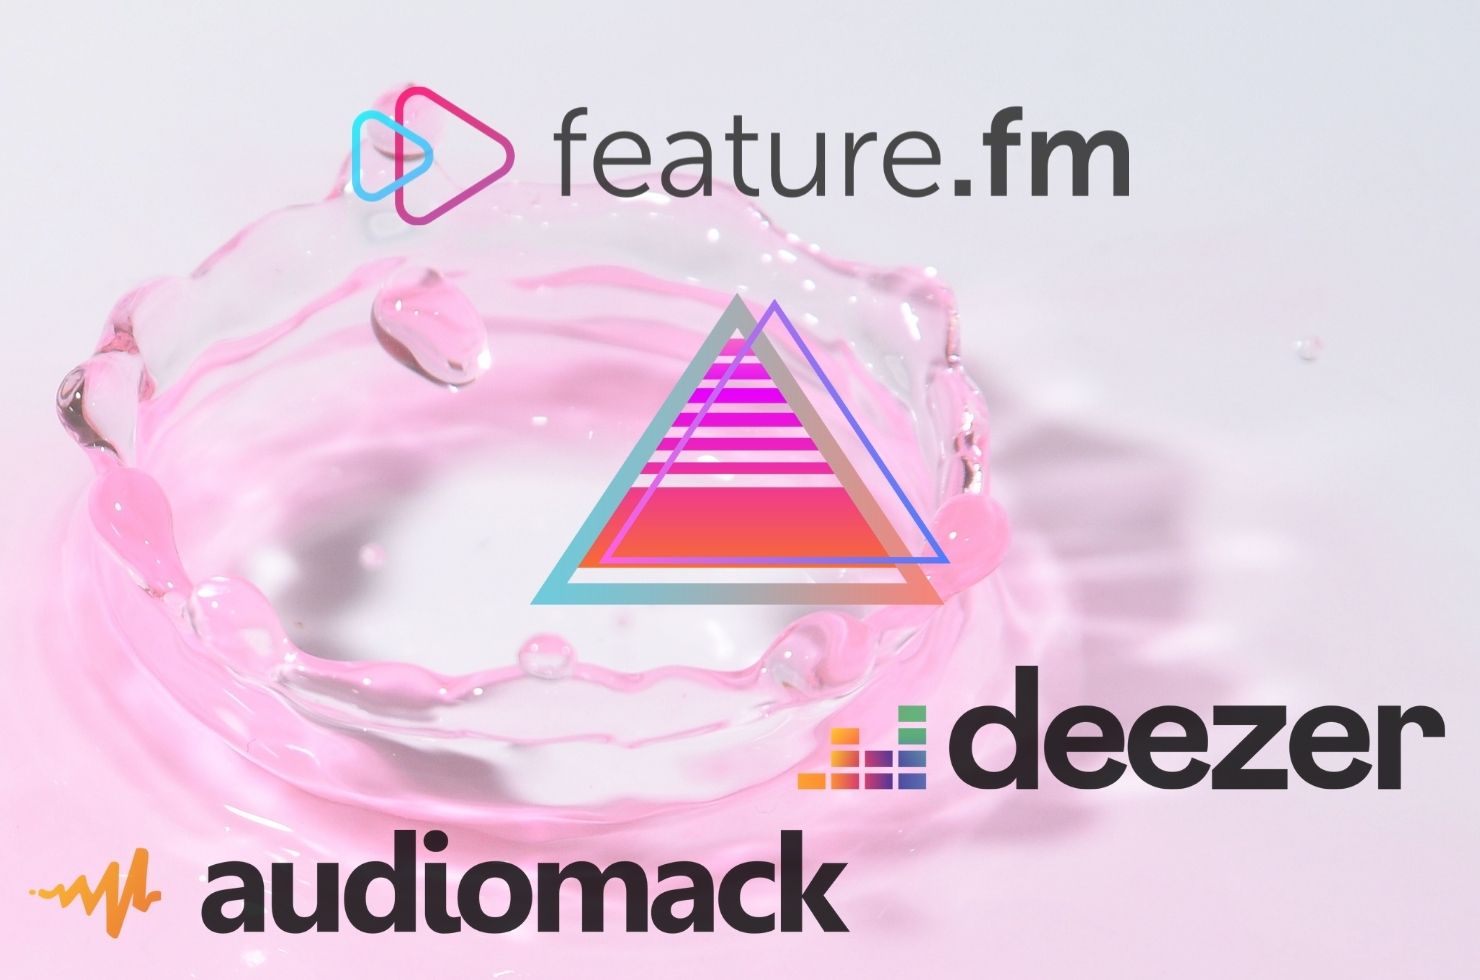 How to Promote Your Music on Deezer and Audiomack with Feature.fm